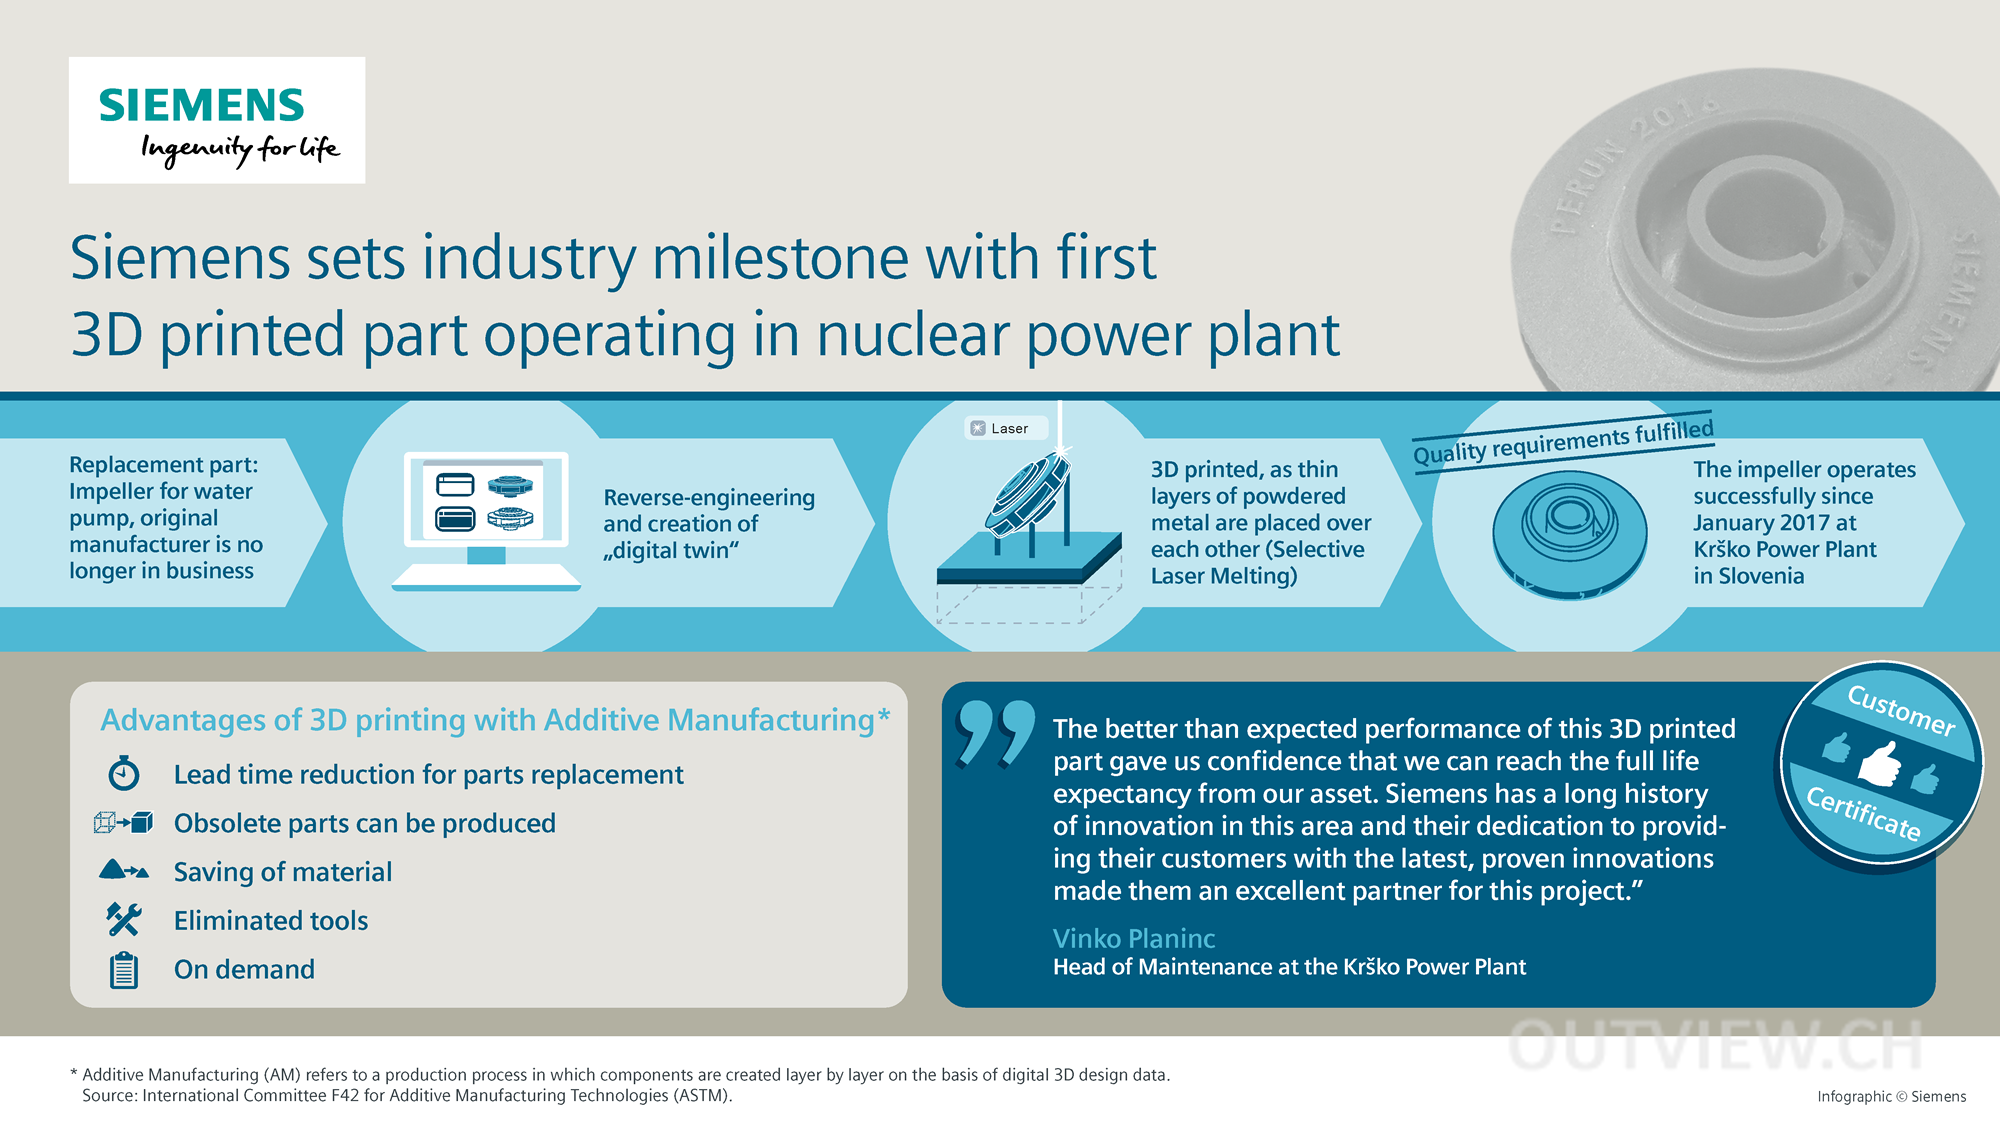 Siemens sets industry milestone with first 3D printed part operating in nuclear power plant